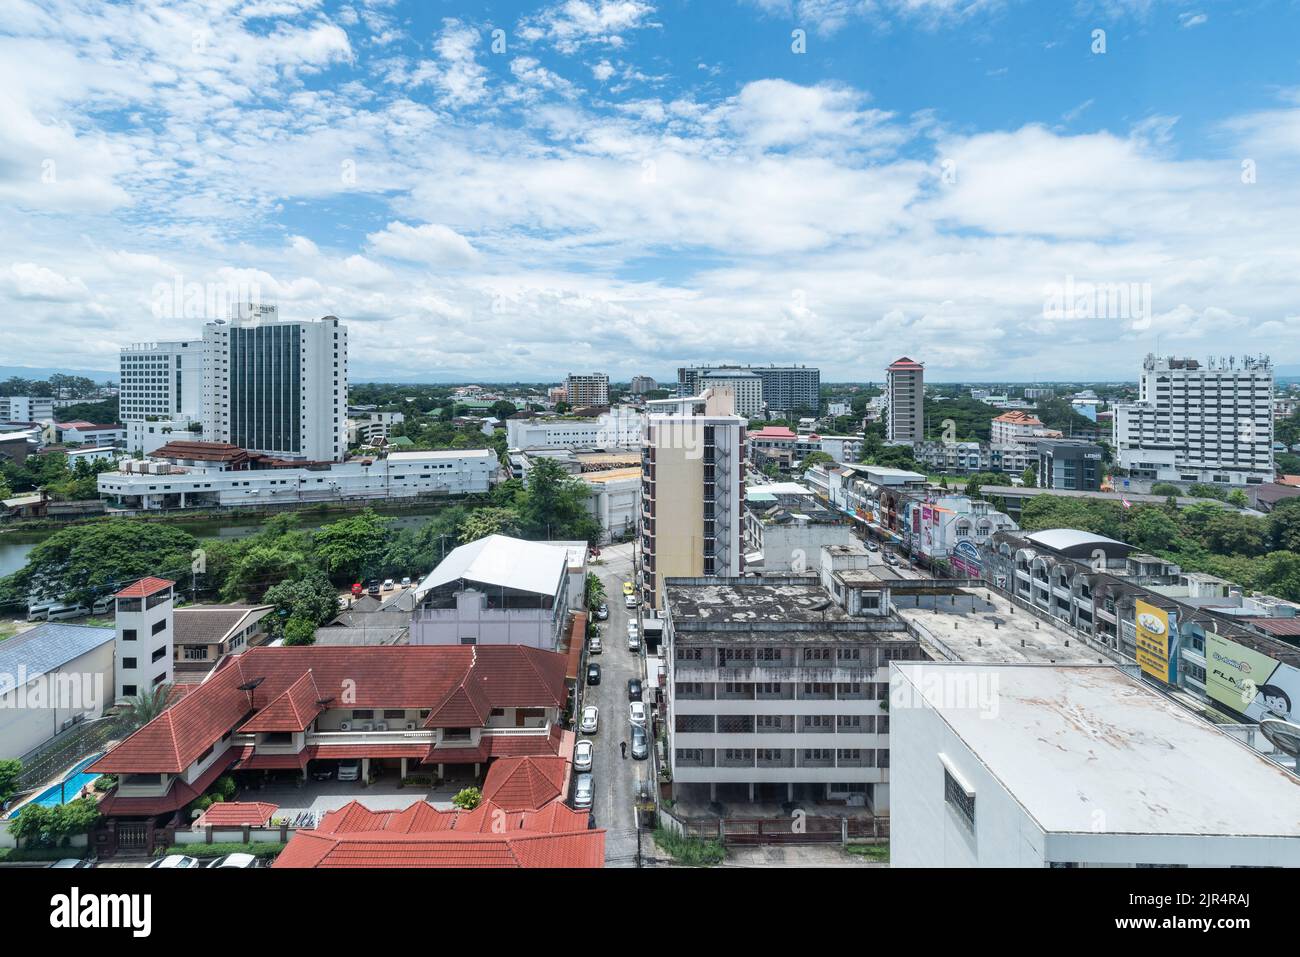 Chiangmai city view with residence buildings scenery Stock Photo